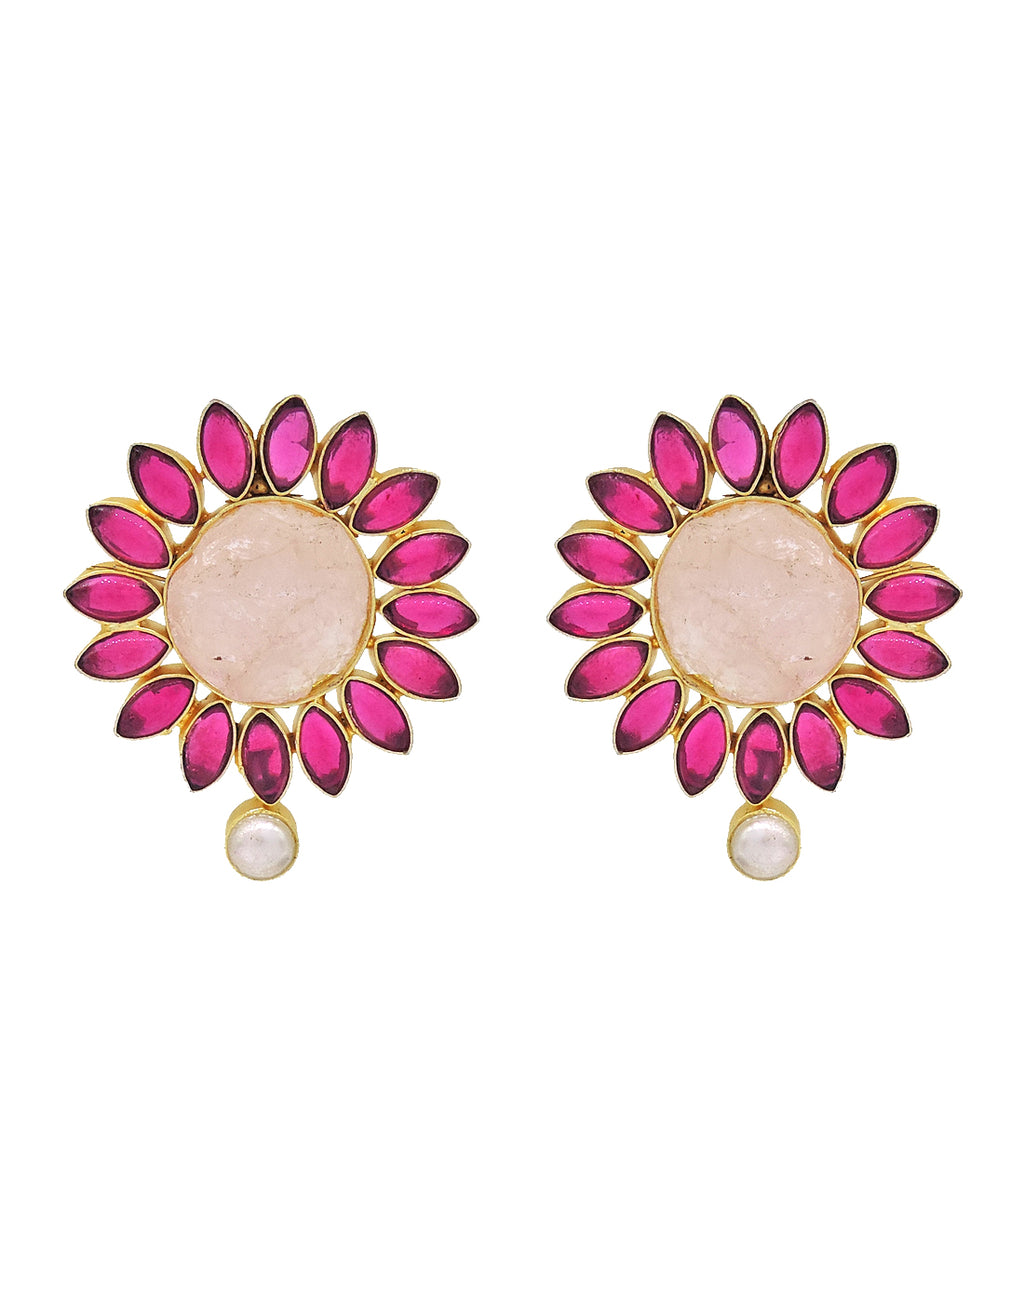 Floral Pearl Drop Earrings - Statement Earrings - Gold-Plated & Hypoallergenic - Made in India - Dubai Jewellery - Dori